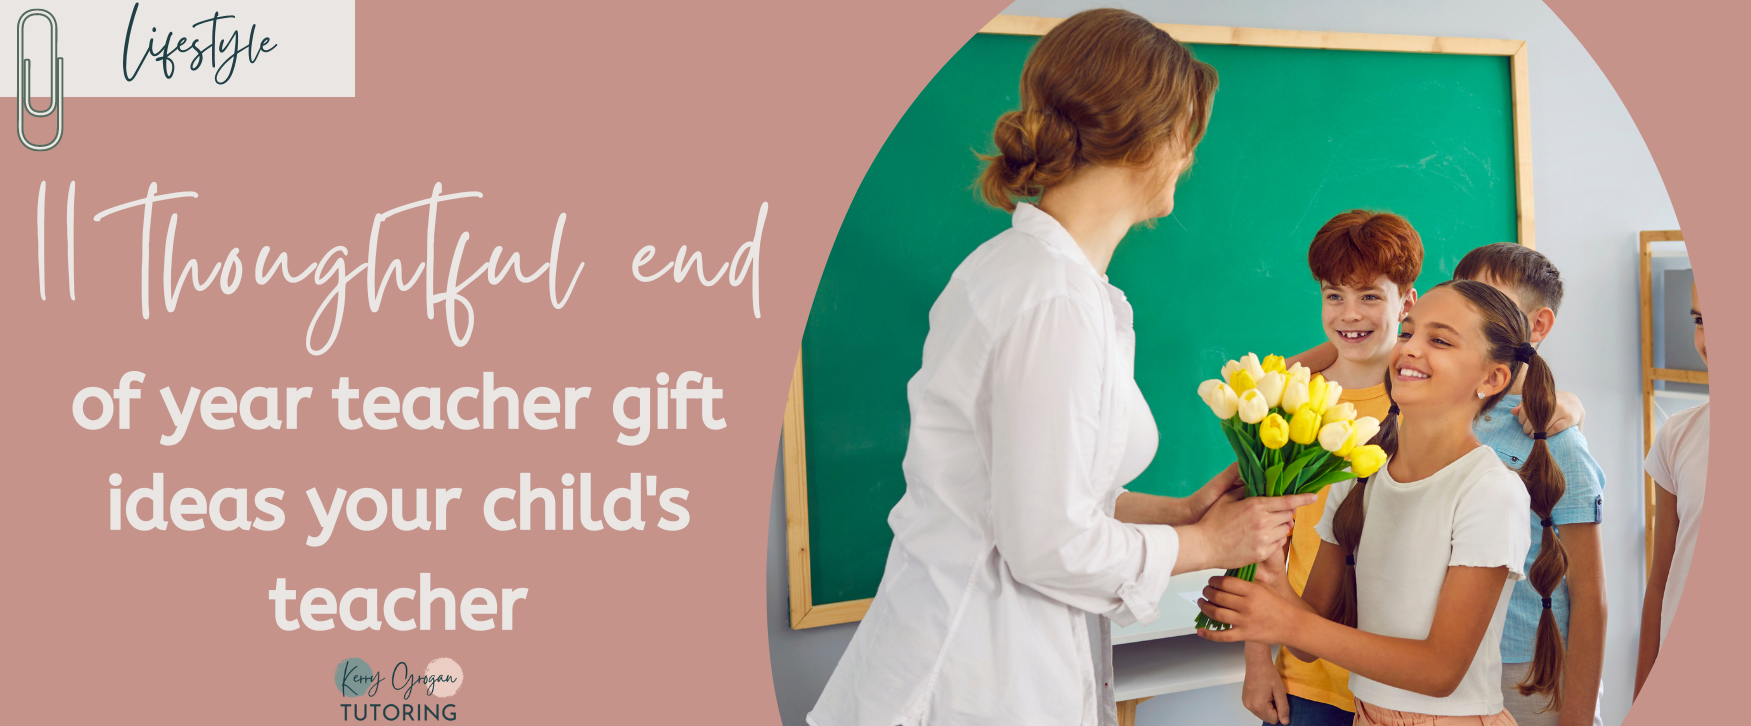 11 thoughtful end of year teacher gift ideas your child's teacher